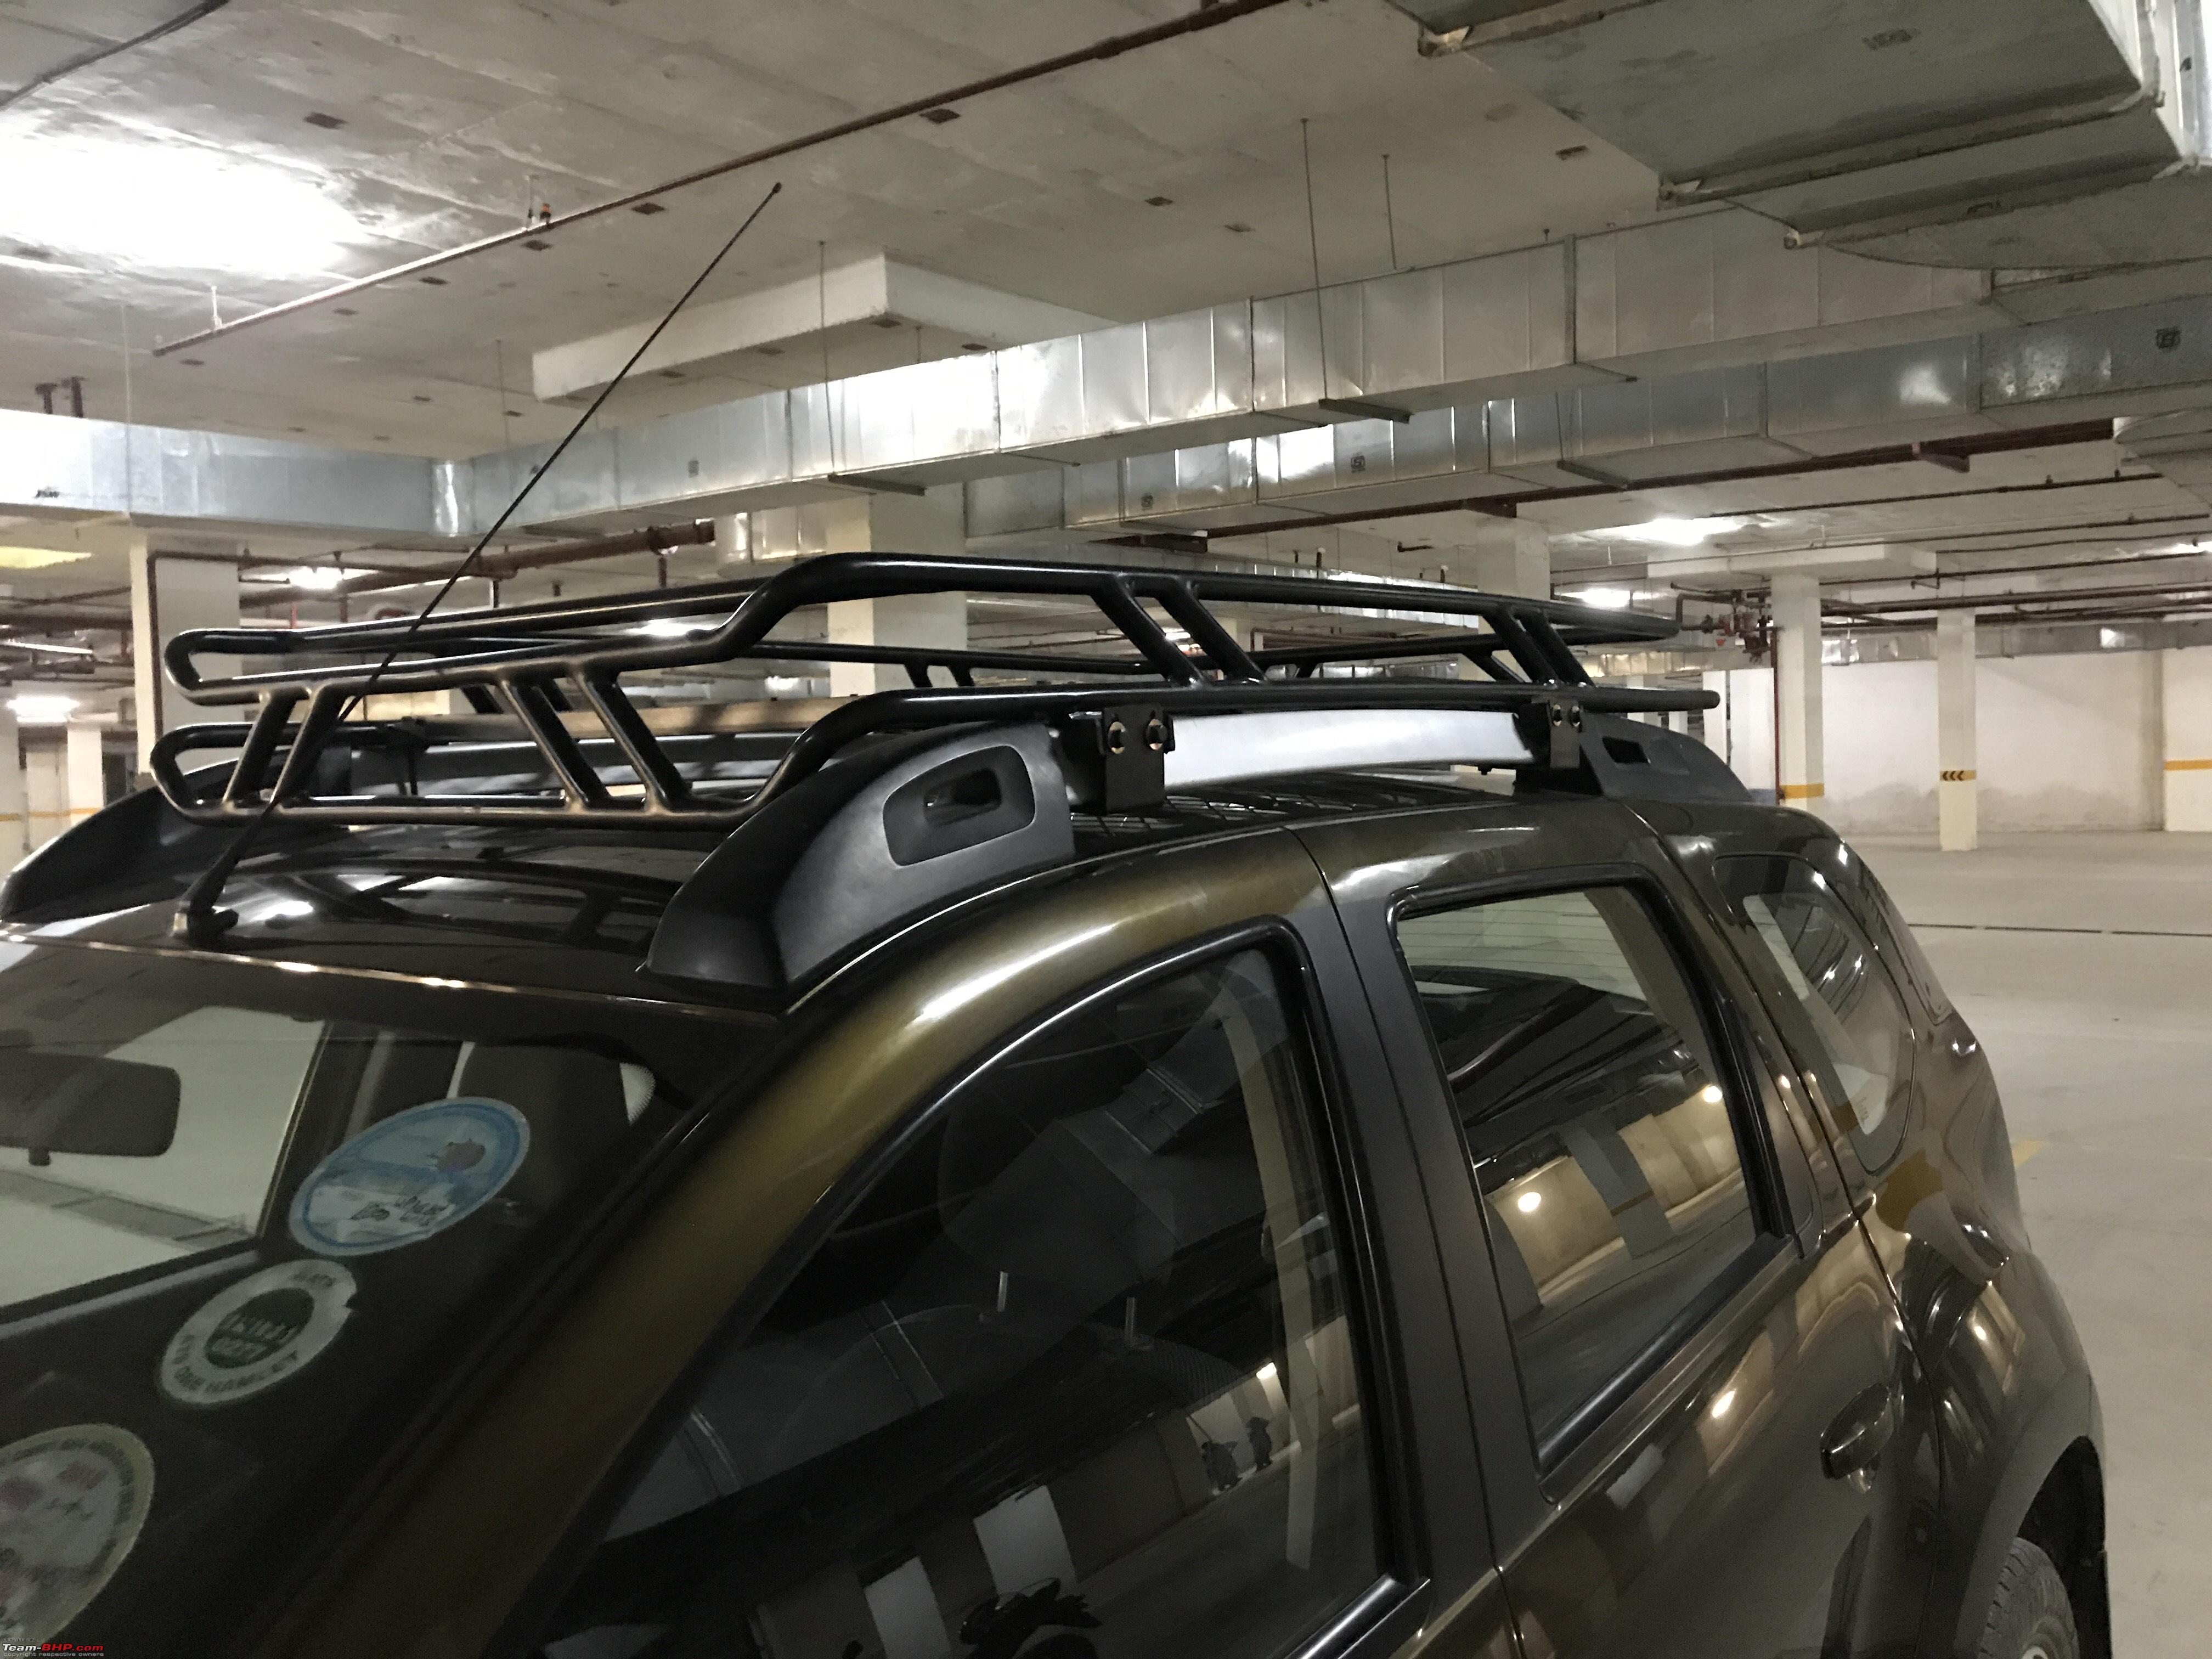 Questions About Roof Racks / Carriers / Bicycle Carriers - Page 6 - Team-BHP